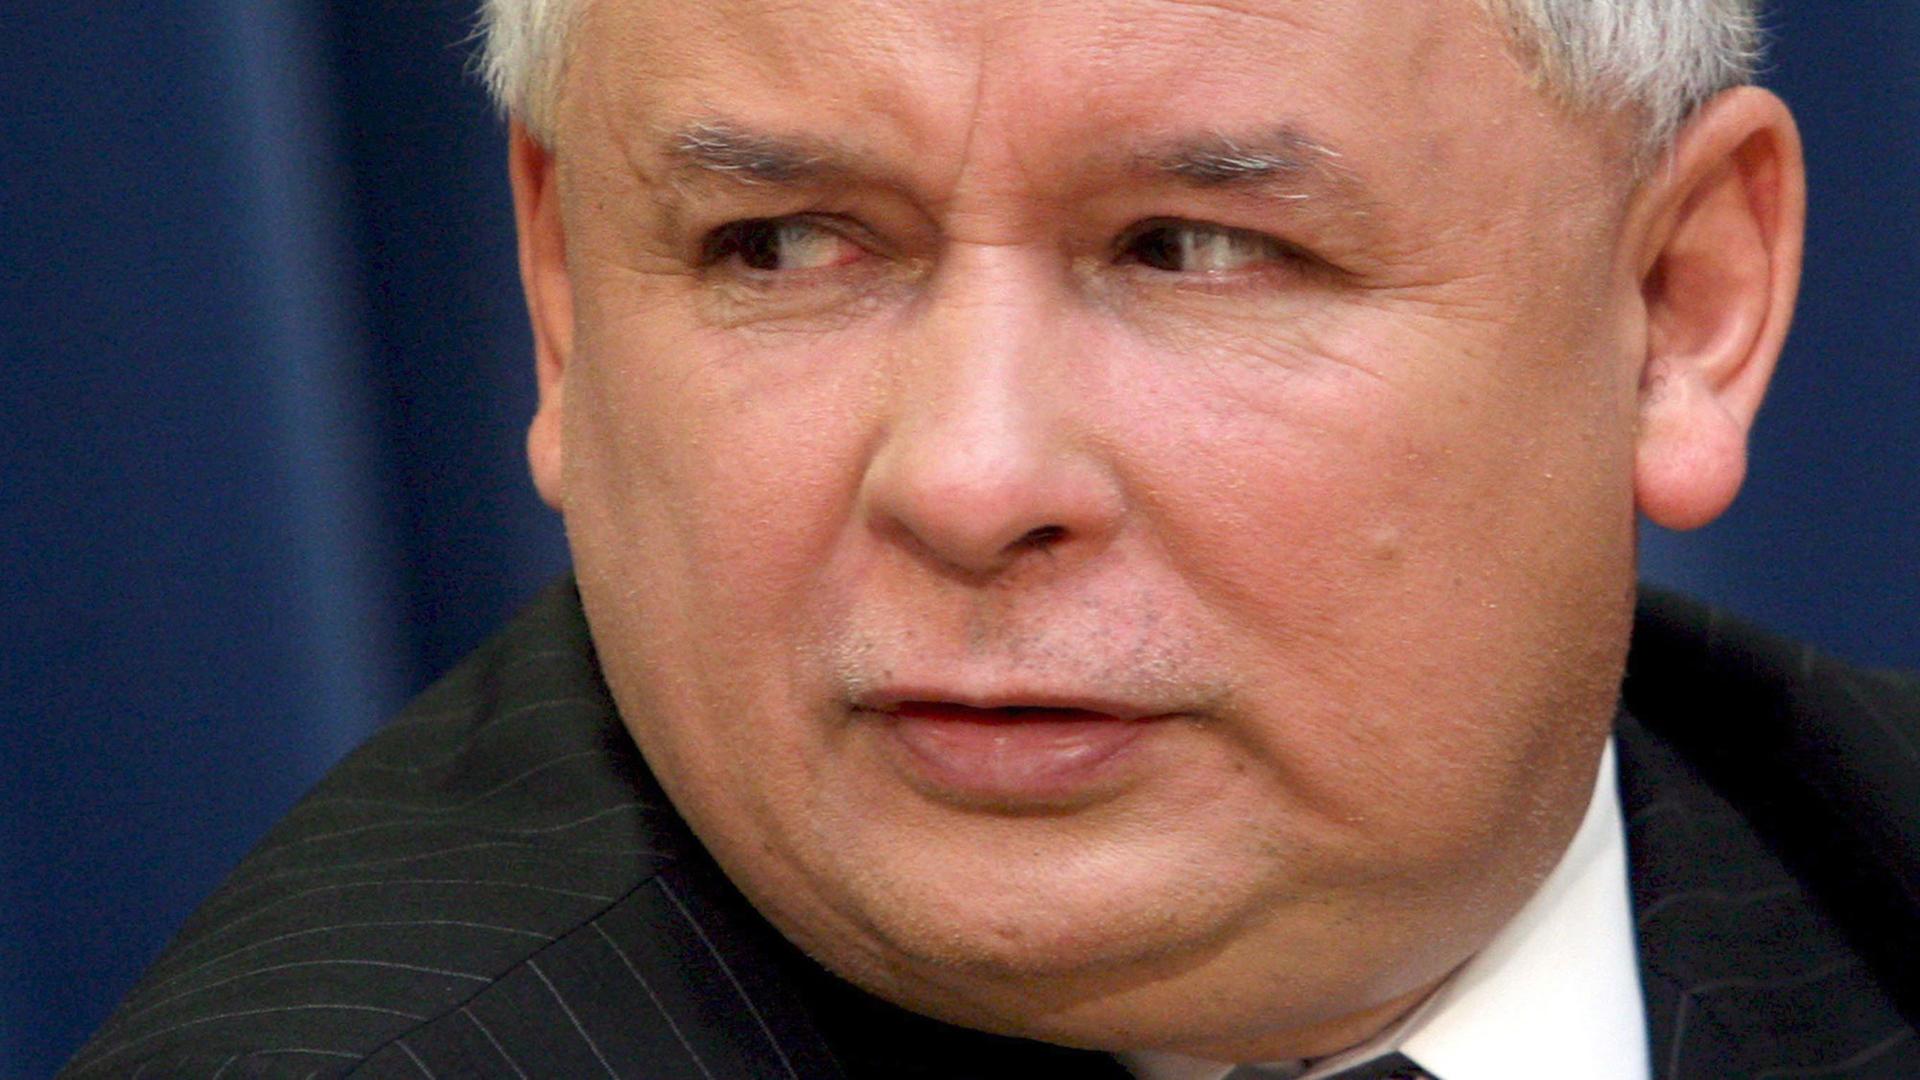 Polish Prime Minister Jaroslaw Kaczynski addresses the media during a press conference about recalling his deputy Andrzej Lepper, late 09 July 2007. President Lech Kaczynski recalled, 09 July 2007 Andrzej Lepper from the post at the motion of PM Jaroslaw Kaczynski, government spokesman Jan Dziedziczak said. 'The decision stems from facts revealed by the Central Anti-corruption Office (CBA) in connection with corruption charges. Two persons have been